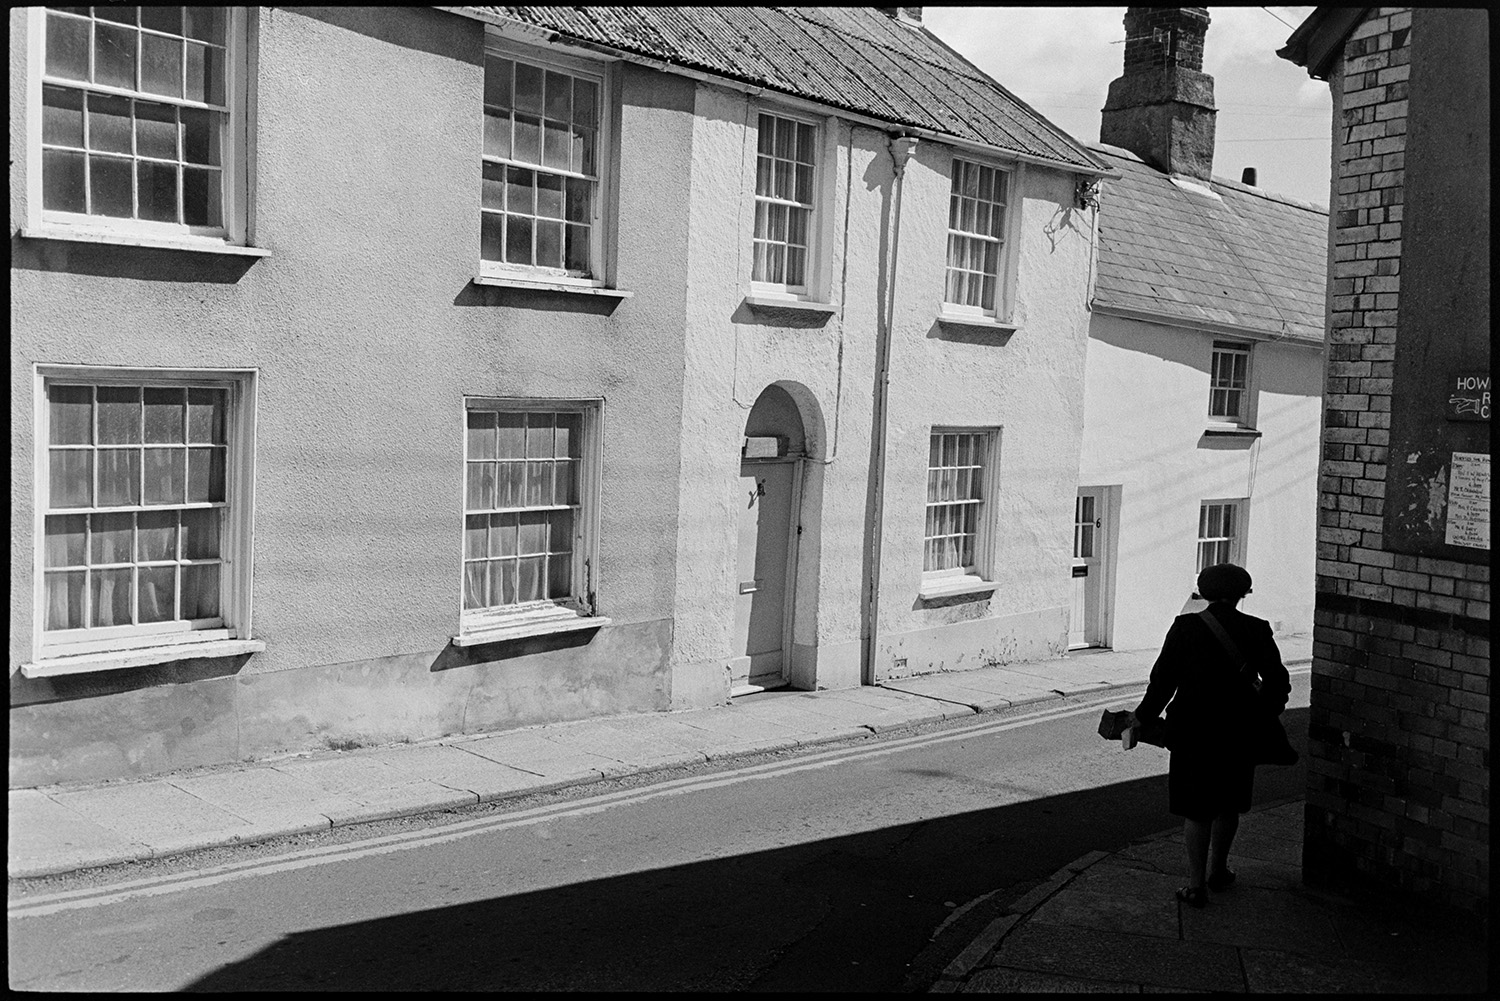 Street scenes with postwoman road sweeper and passers by. 
[Ms Bisset, a postwoman, walking along a street in Torrington past terraced houses.]